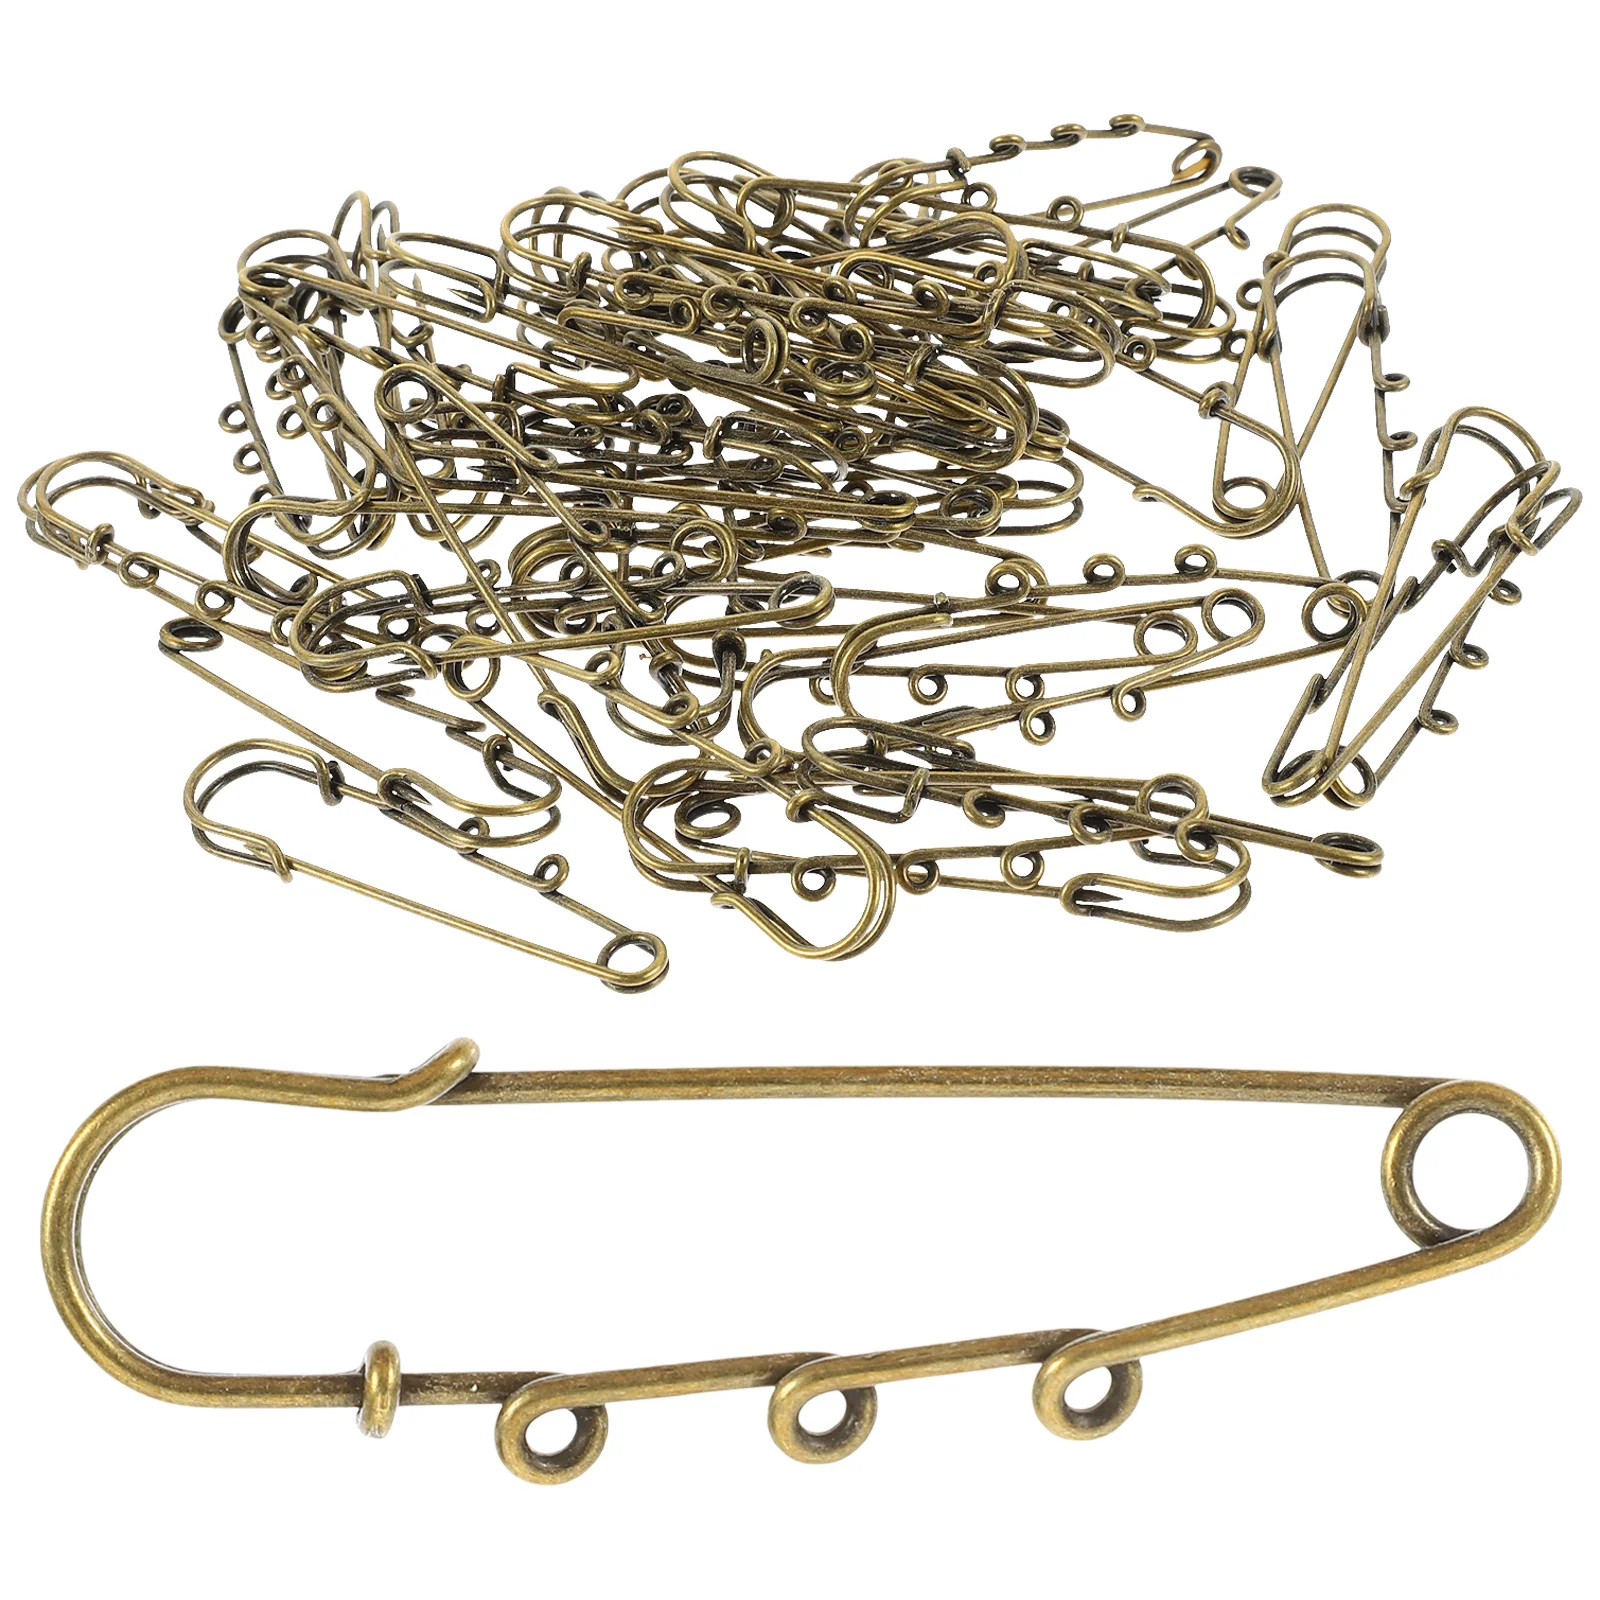 

50 Pcs Brooch Pin Crafts Findings Heavy Duty Clothes DIY Jewelry Brooches Handicraft Needles Holes